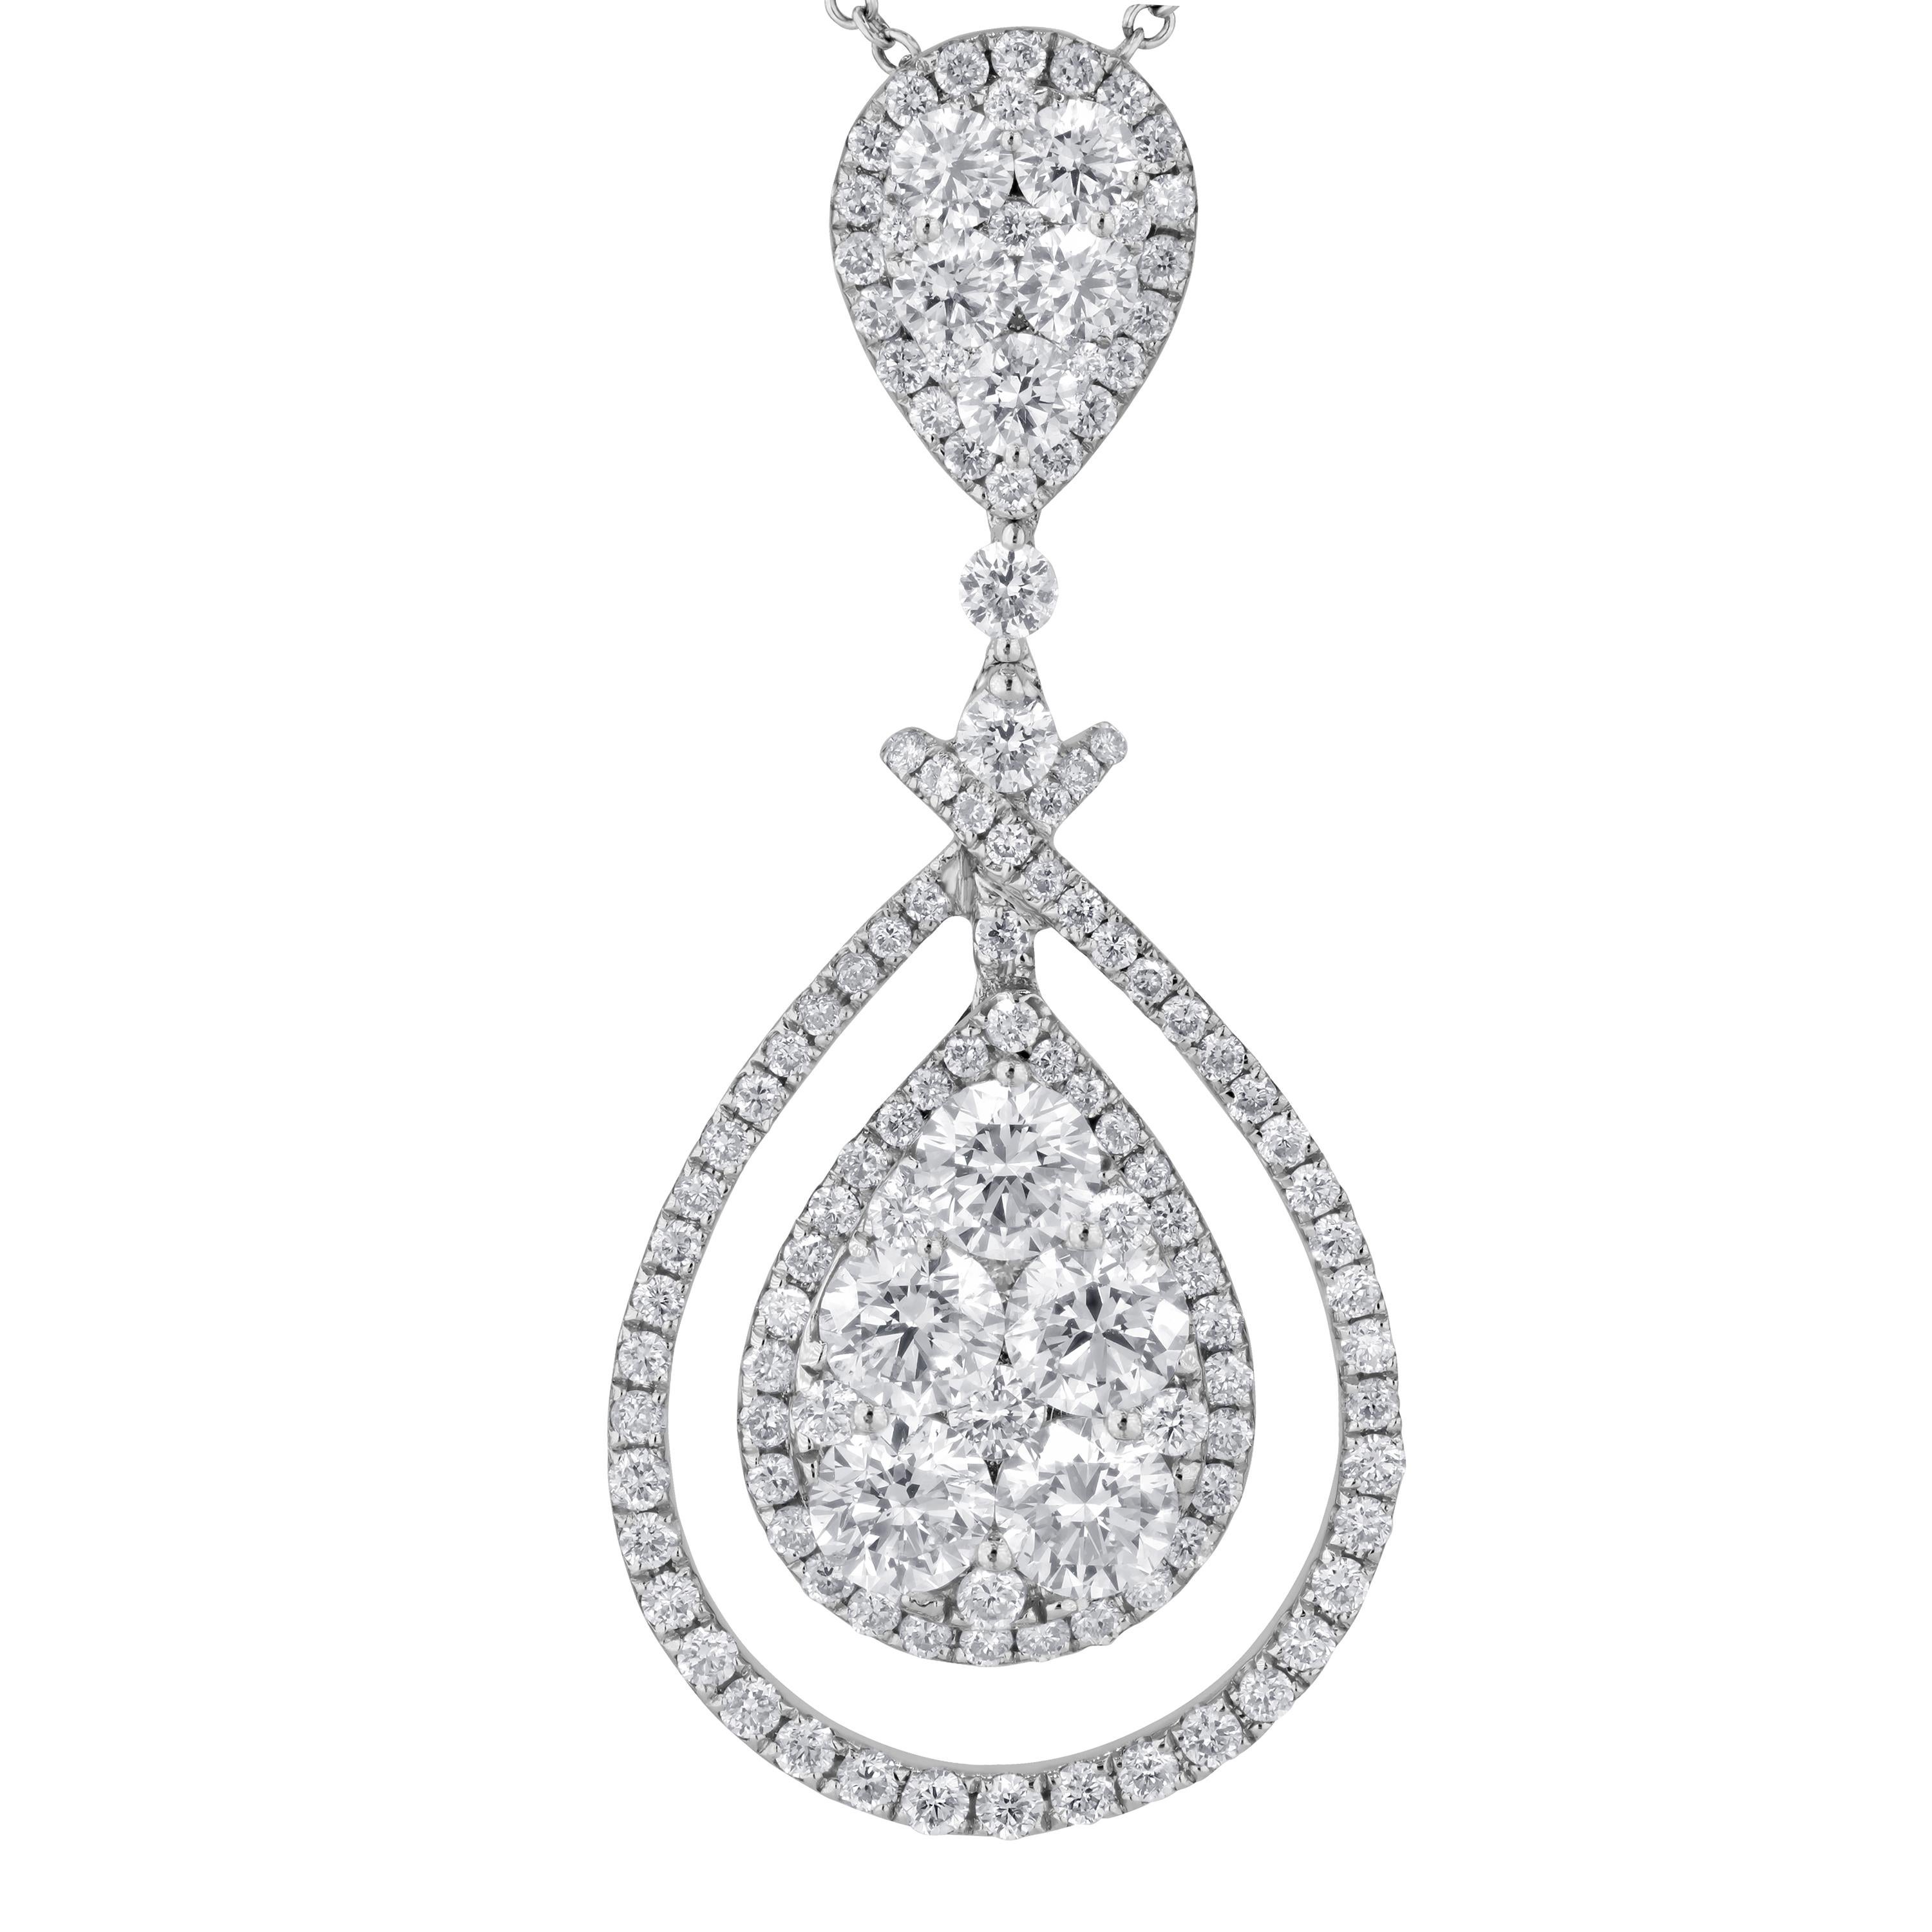 Prepare to be captivated by the delicate allure of this pendant, a true testament to meticulous craftsmanship and artistic design. At first glance, it may appear to be a substantial pear-shaped pendant, but upon closer inspection, the magic unfolds.